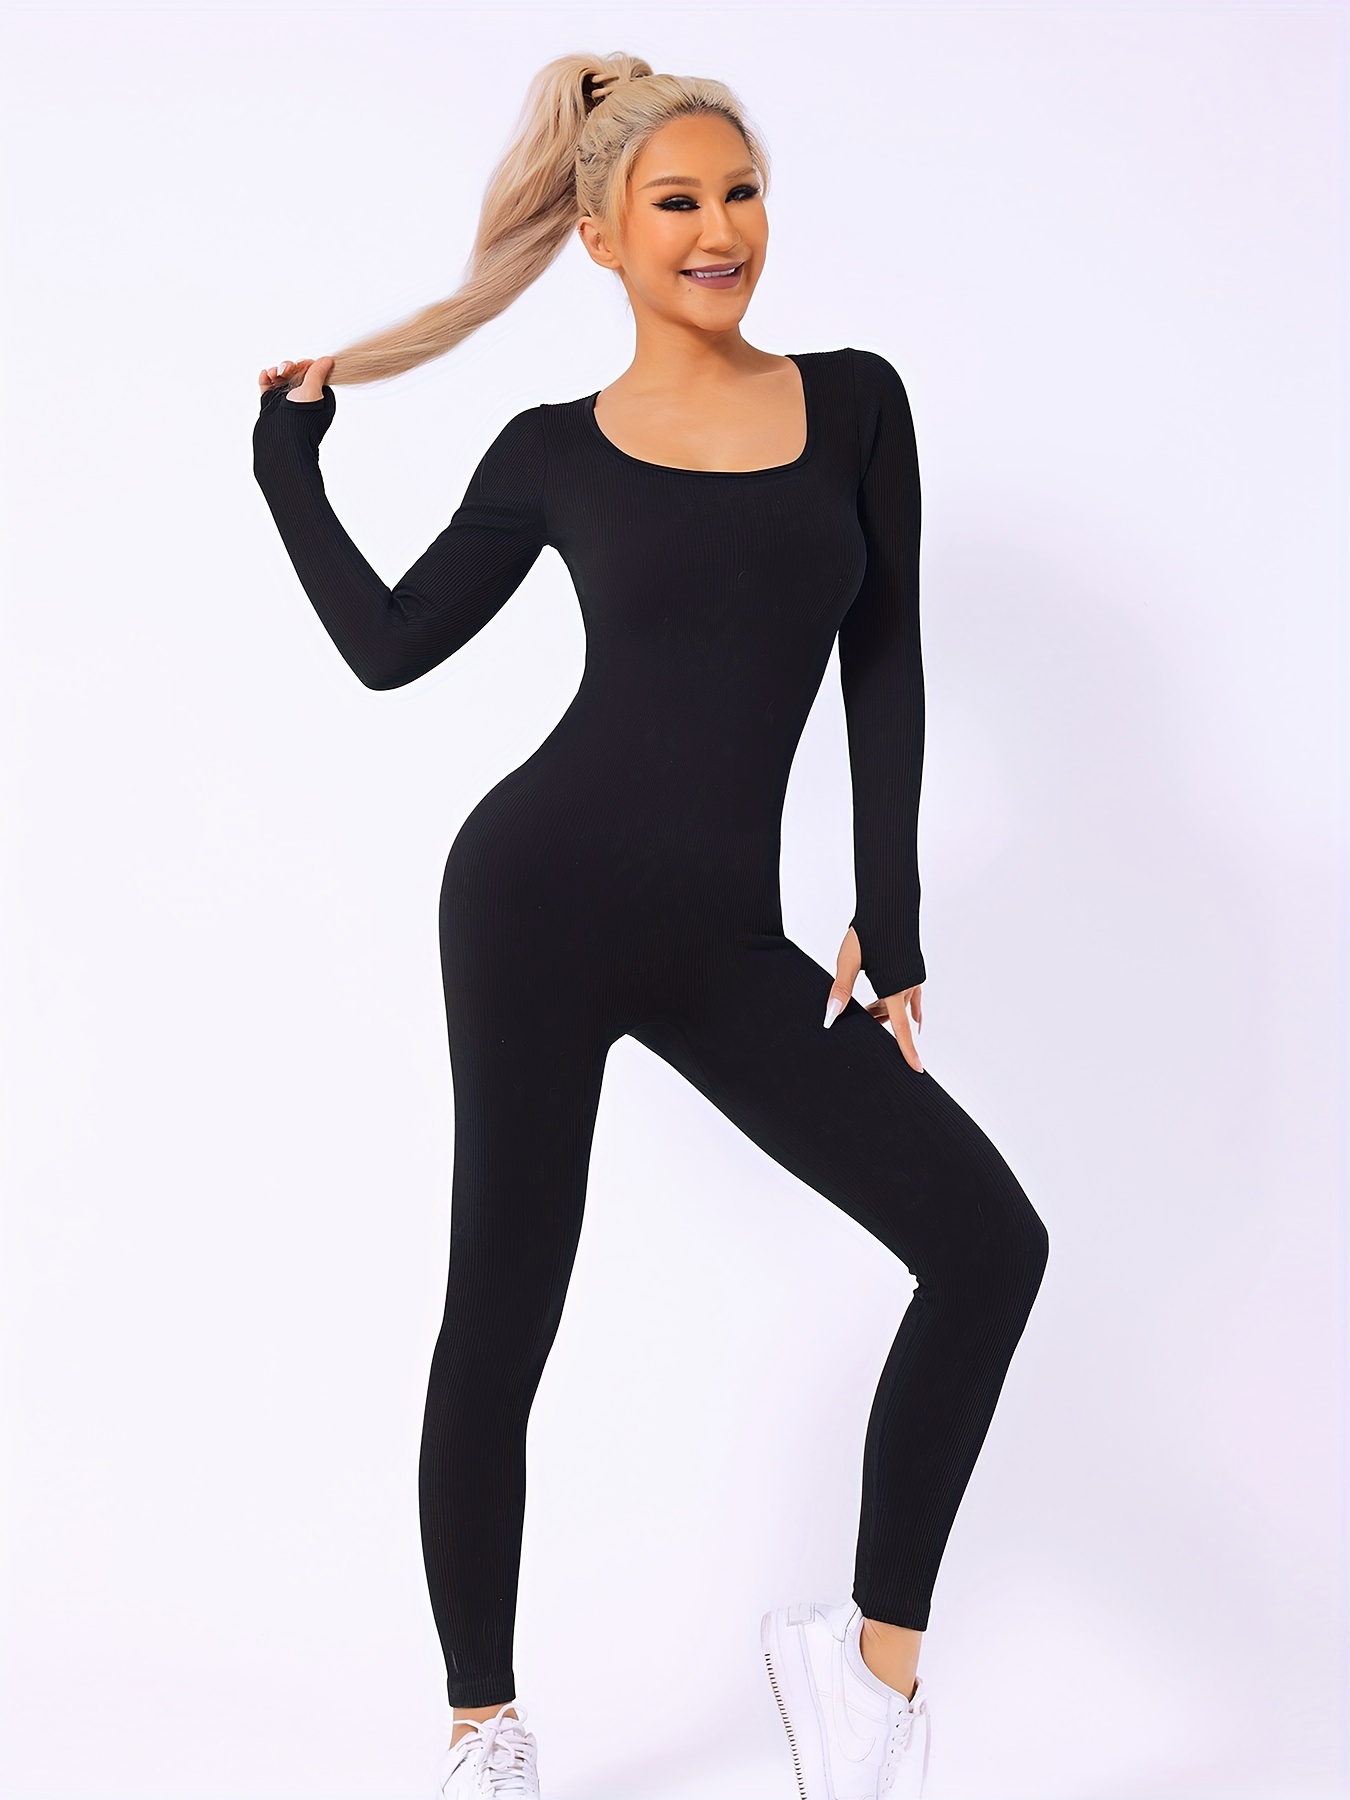 Aueoeo Butt Lifting Shapewear, Body Suit Lingerie Women Women's Long  Sleeved Solid Color Fashion Tight Fitting Cutout Jumpsuit 